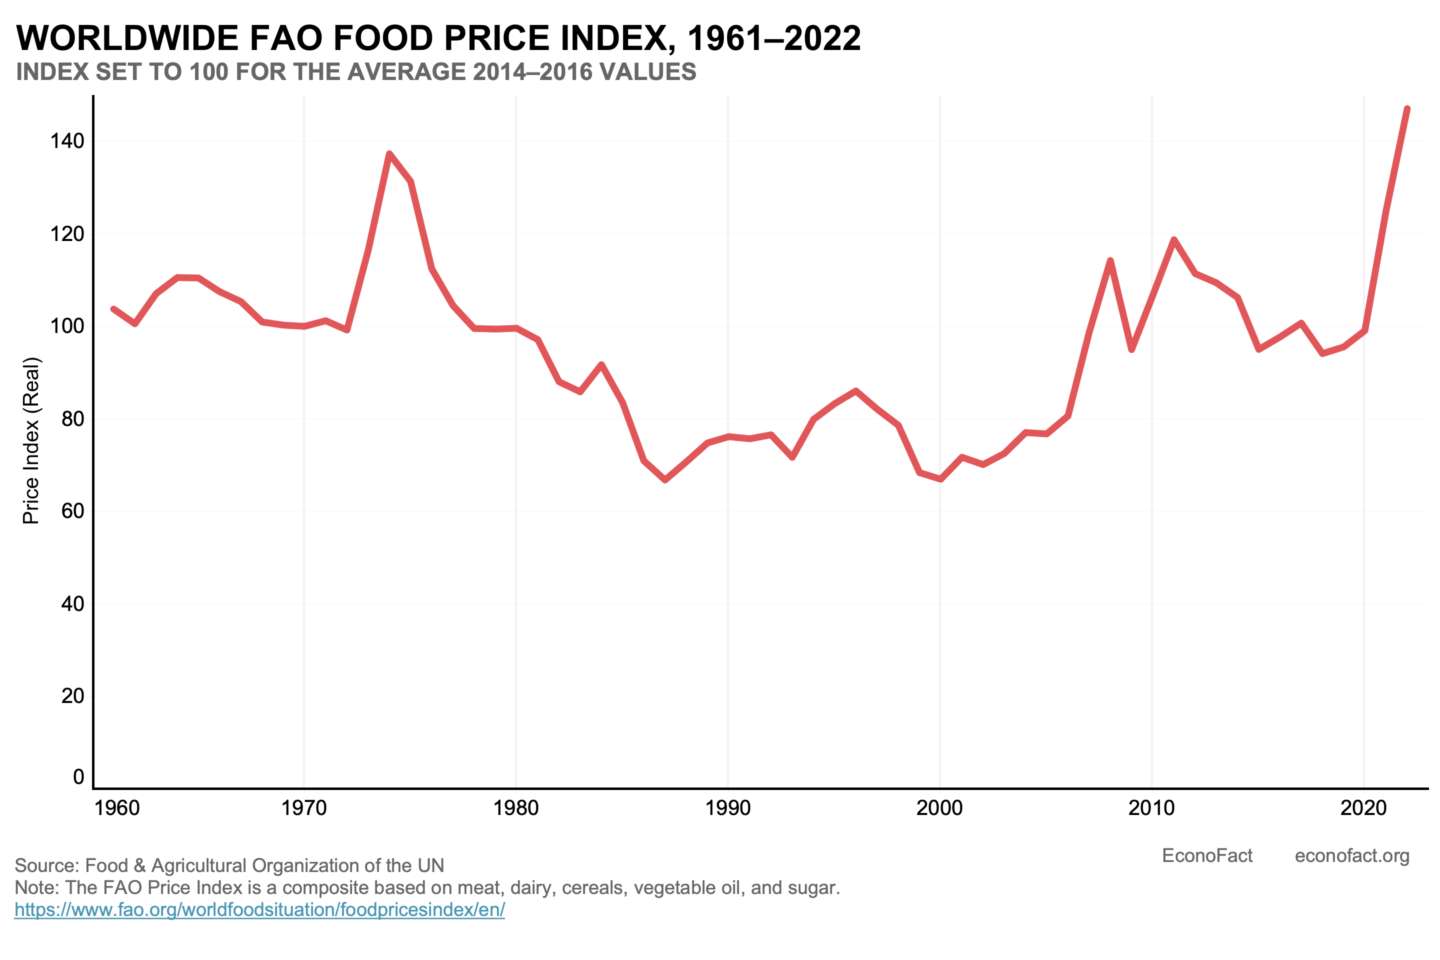 Worldwide FAO Food Price Index, 1961-2022. The FAO Food Price Index hit an all-time high in 2022, up over 100% since the year 2000.